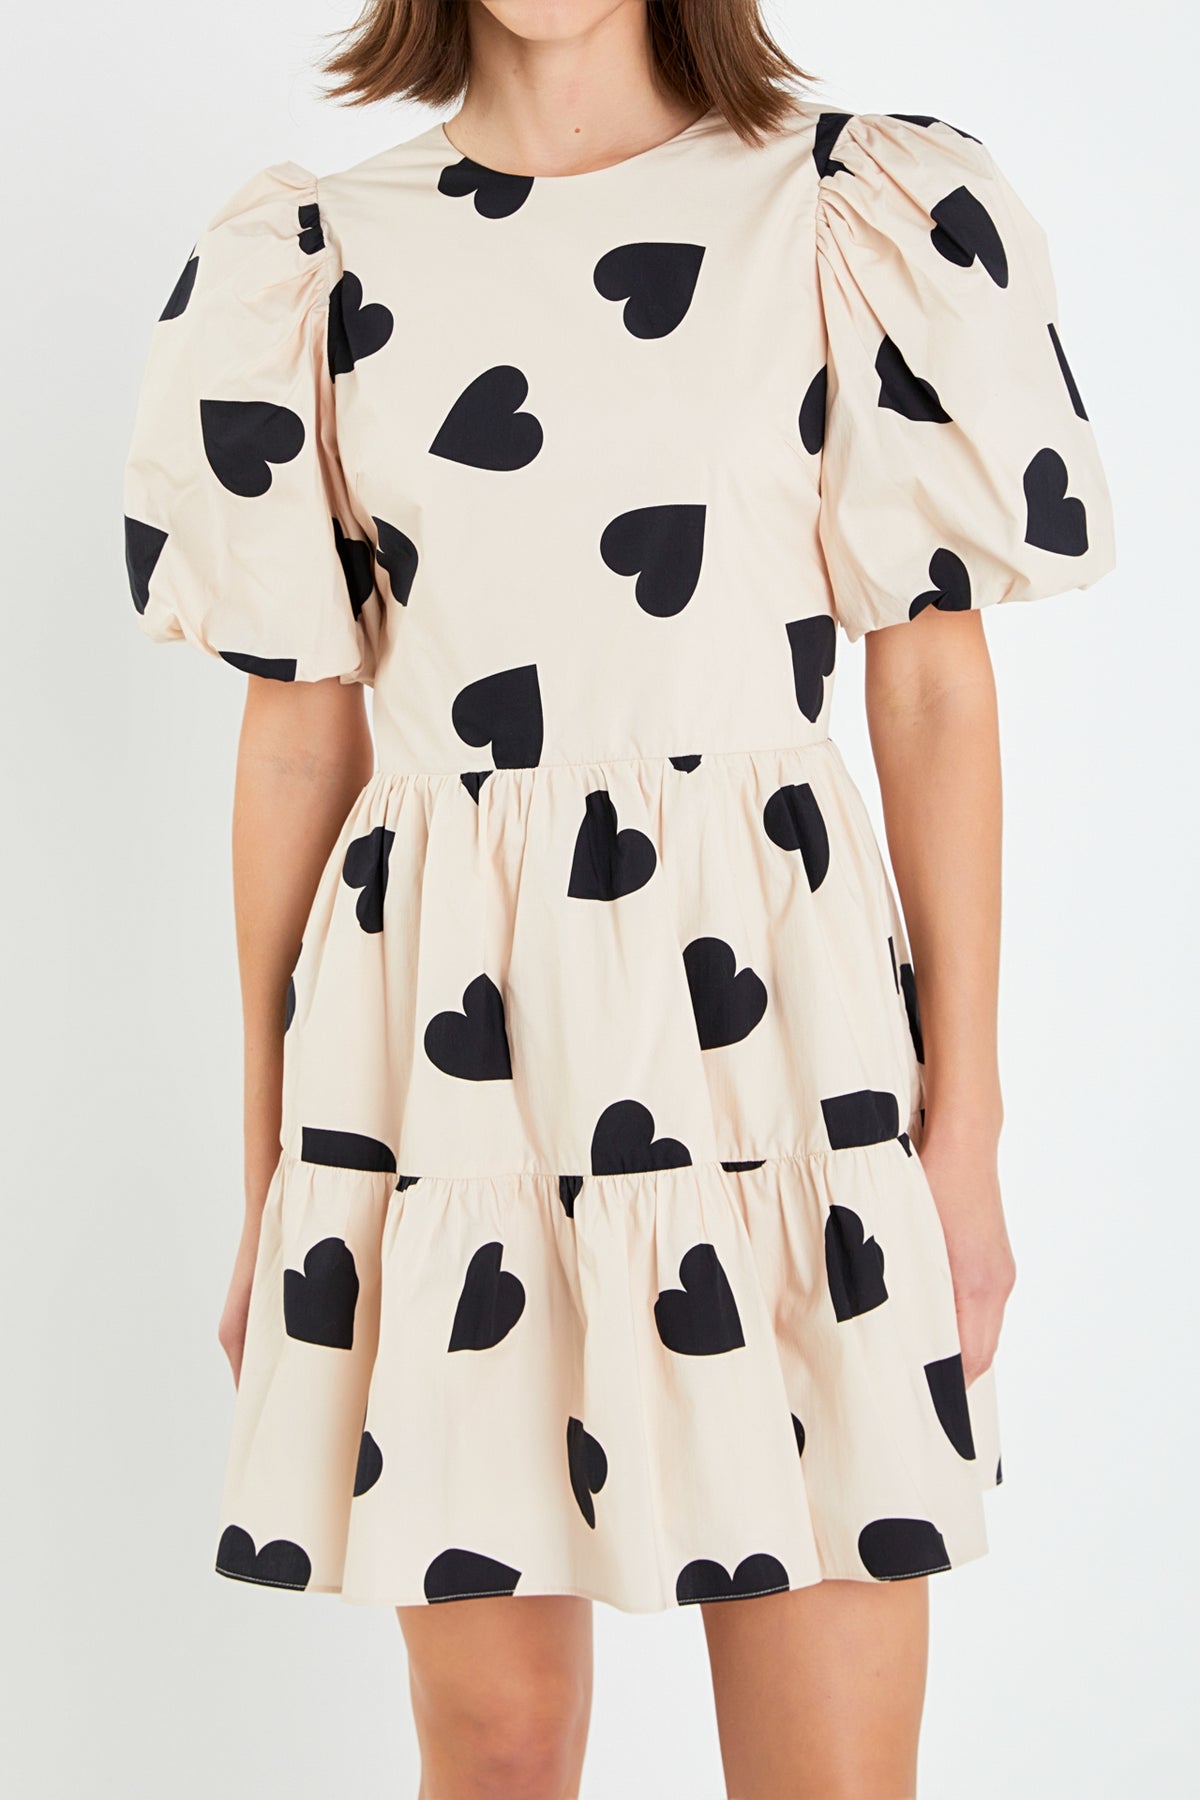 ENGLISH FACTORY - Heart Shape Back Cut out Mini Dress - DRESSES available at Objectrare